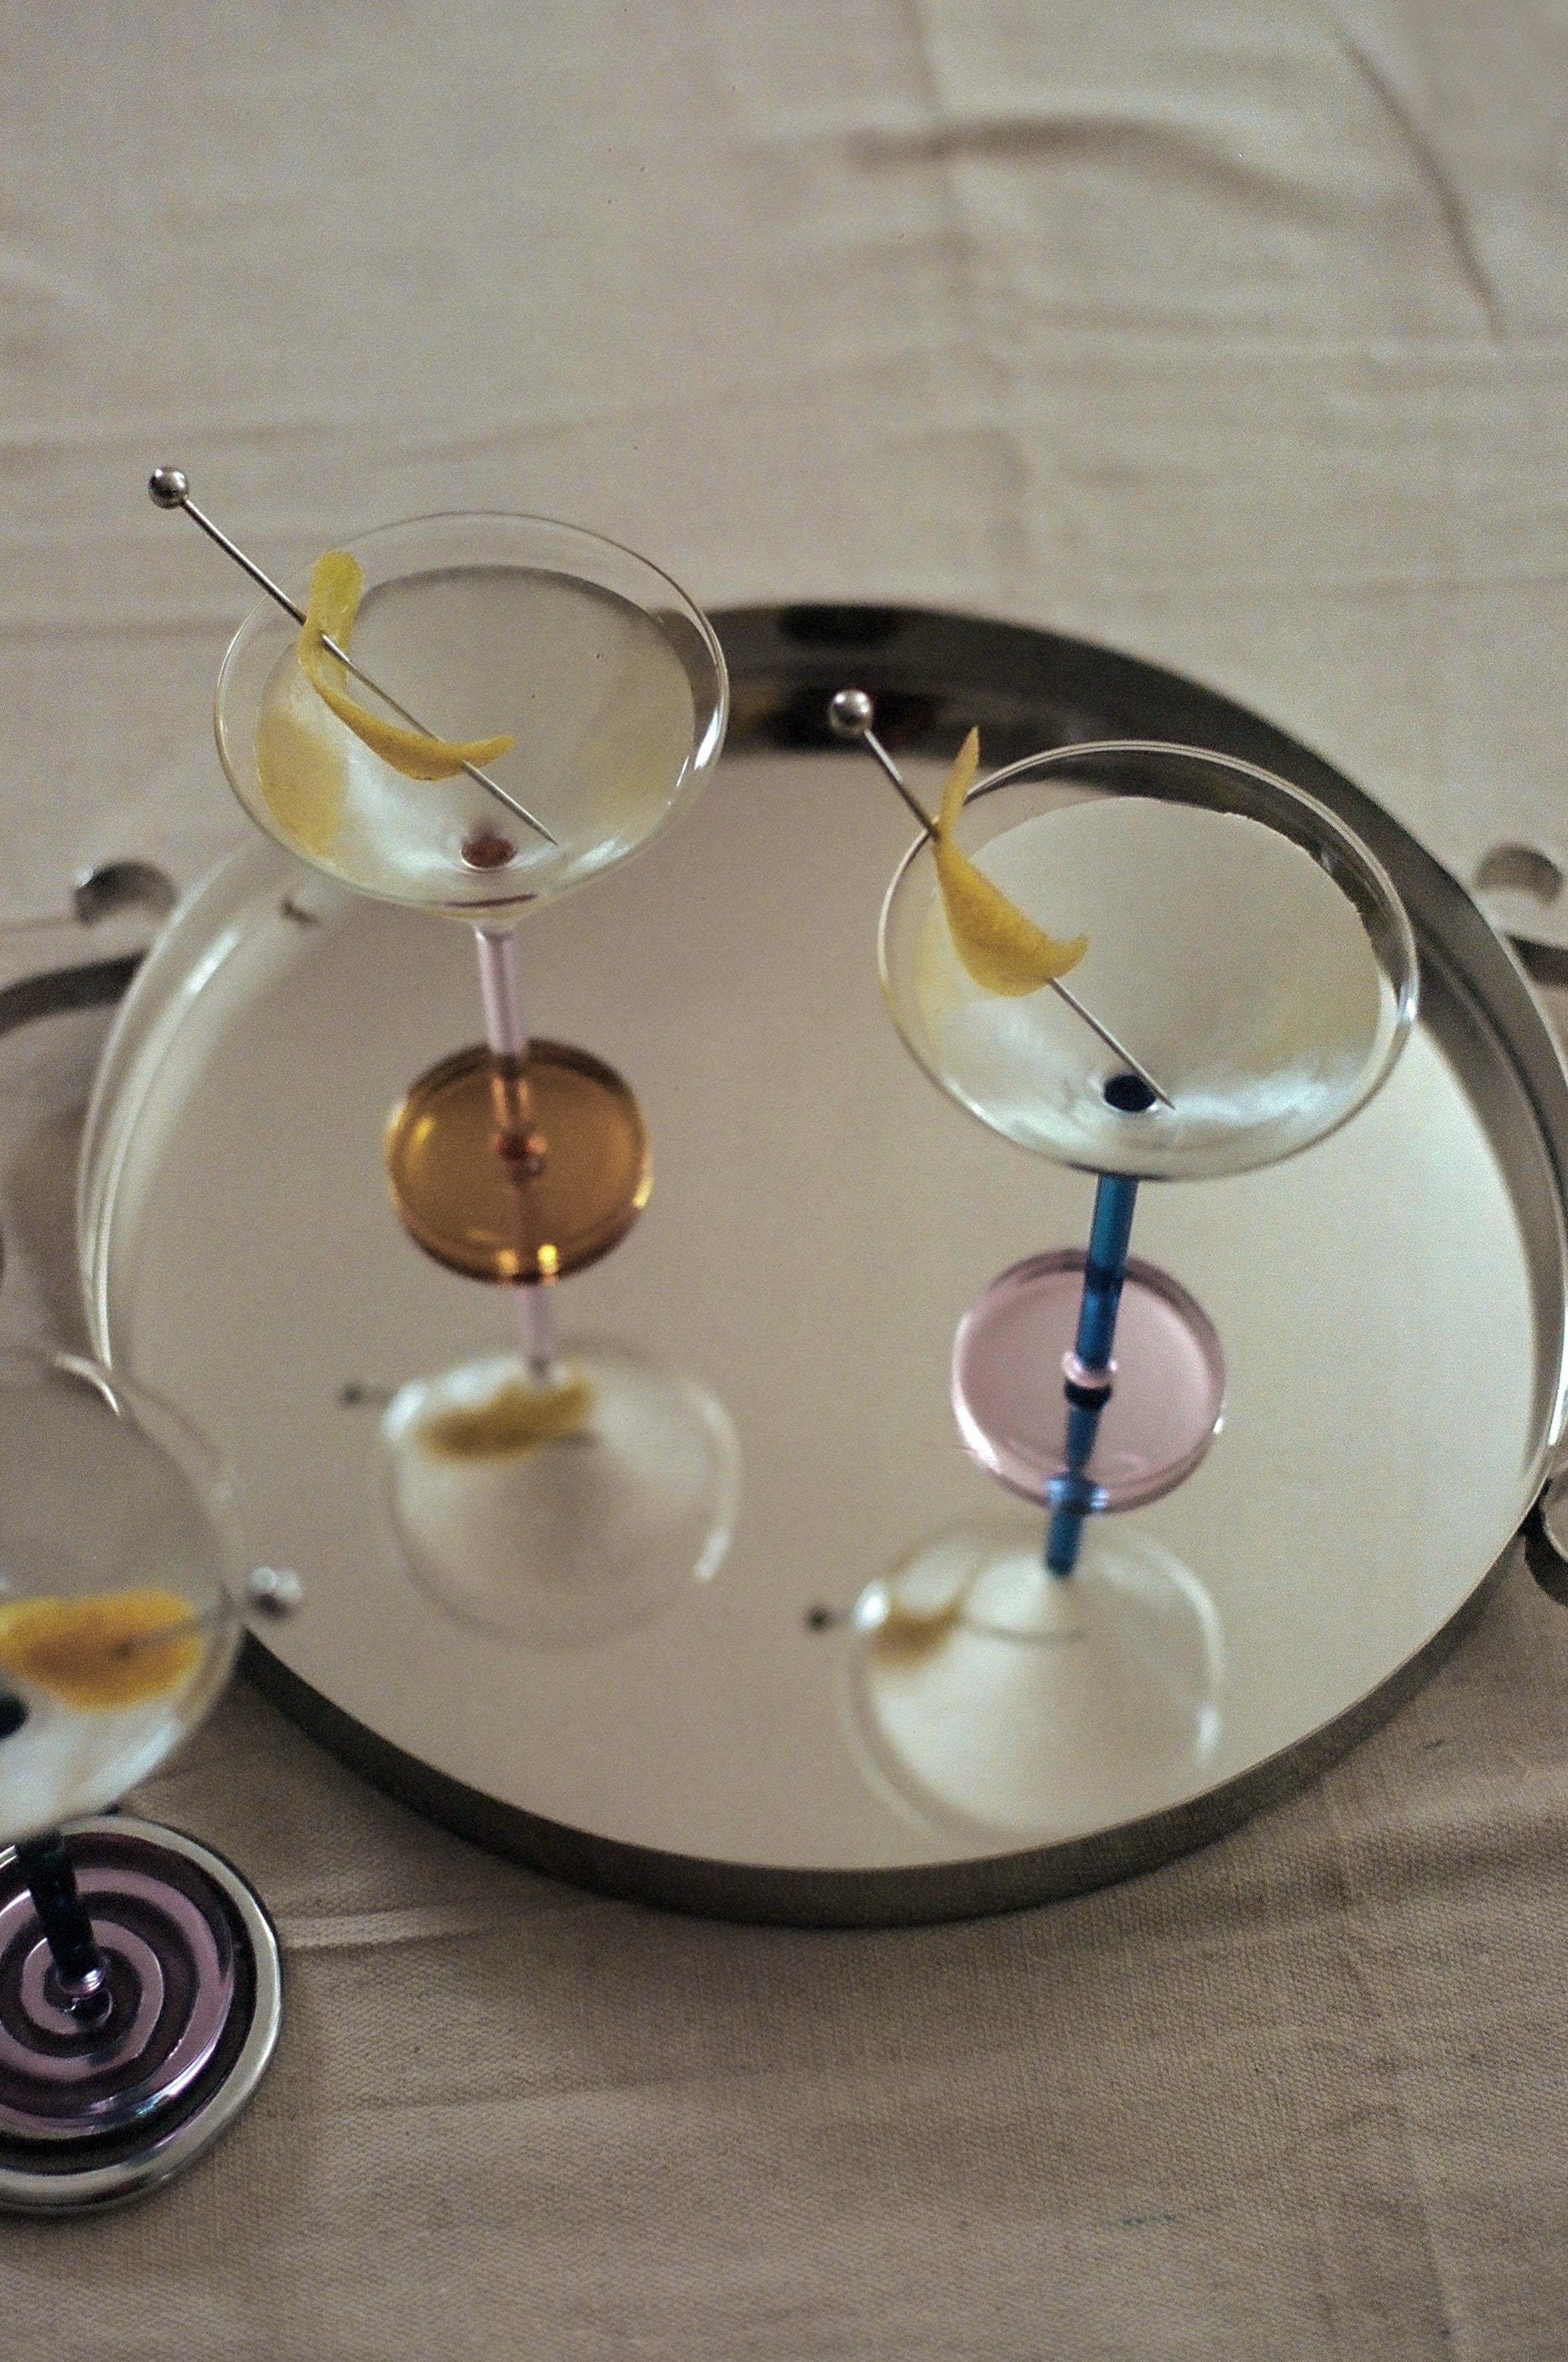 A tray holds three Piano Cocktail Glasses by Sophie Lou Jacobsen, each with a lemon twist; the glasses feature colorful stems, including yellow, pink, and purple, reflected on the tray's surface.